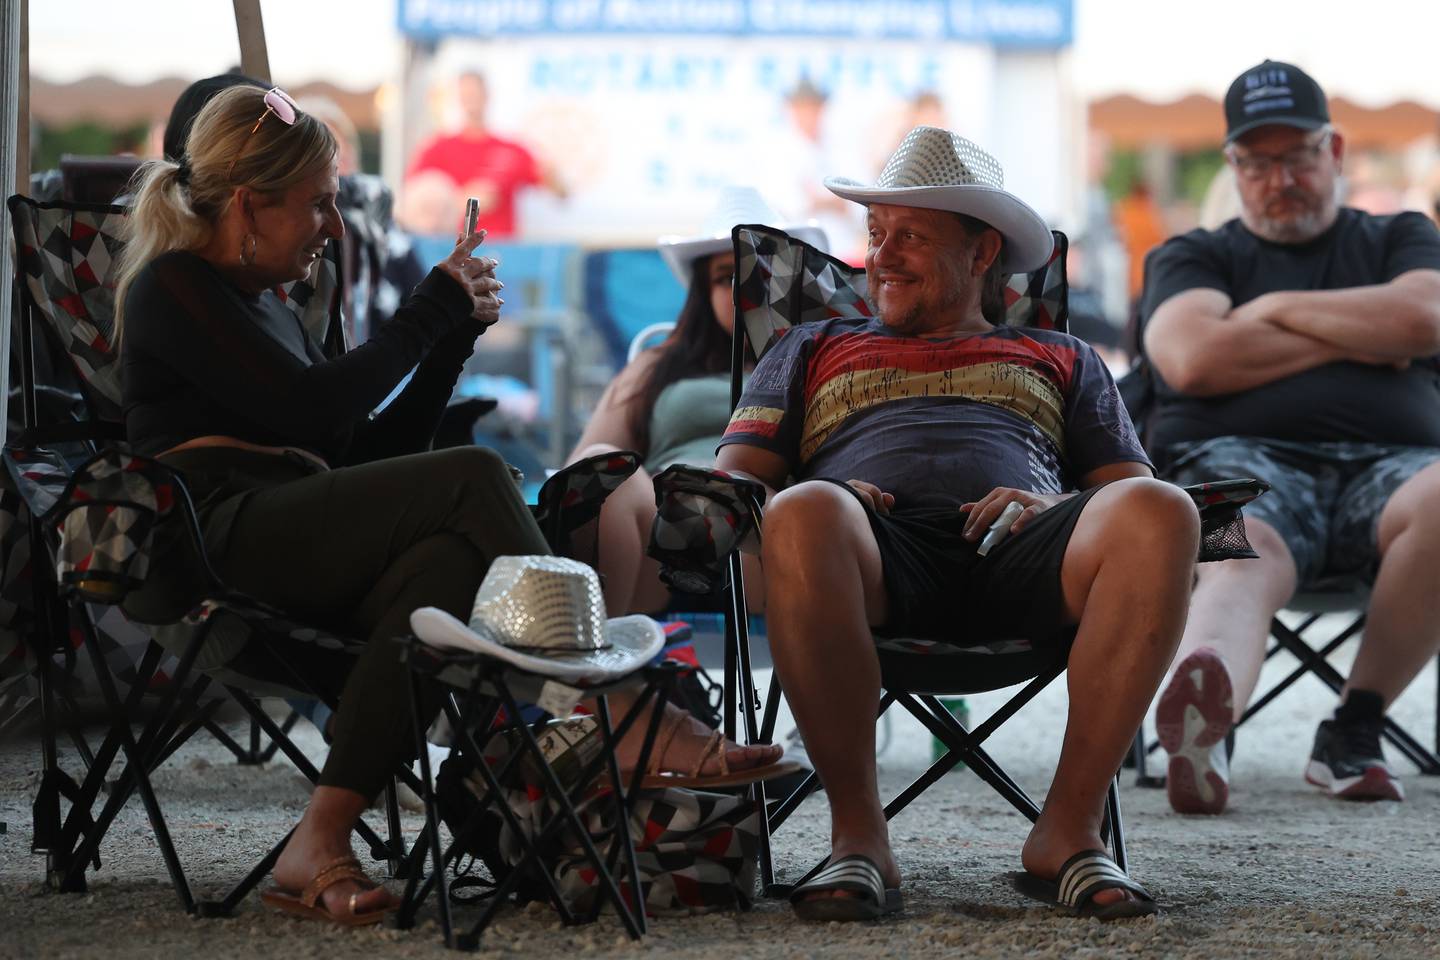 Krissy Norkaitis, left, takes a photo of Linas Jakovlevas wearing a novelty cowboy hat while listening to live music at the Beer Garden tent at Lockport’s Canal Days on Friday, June 9, 2023.